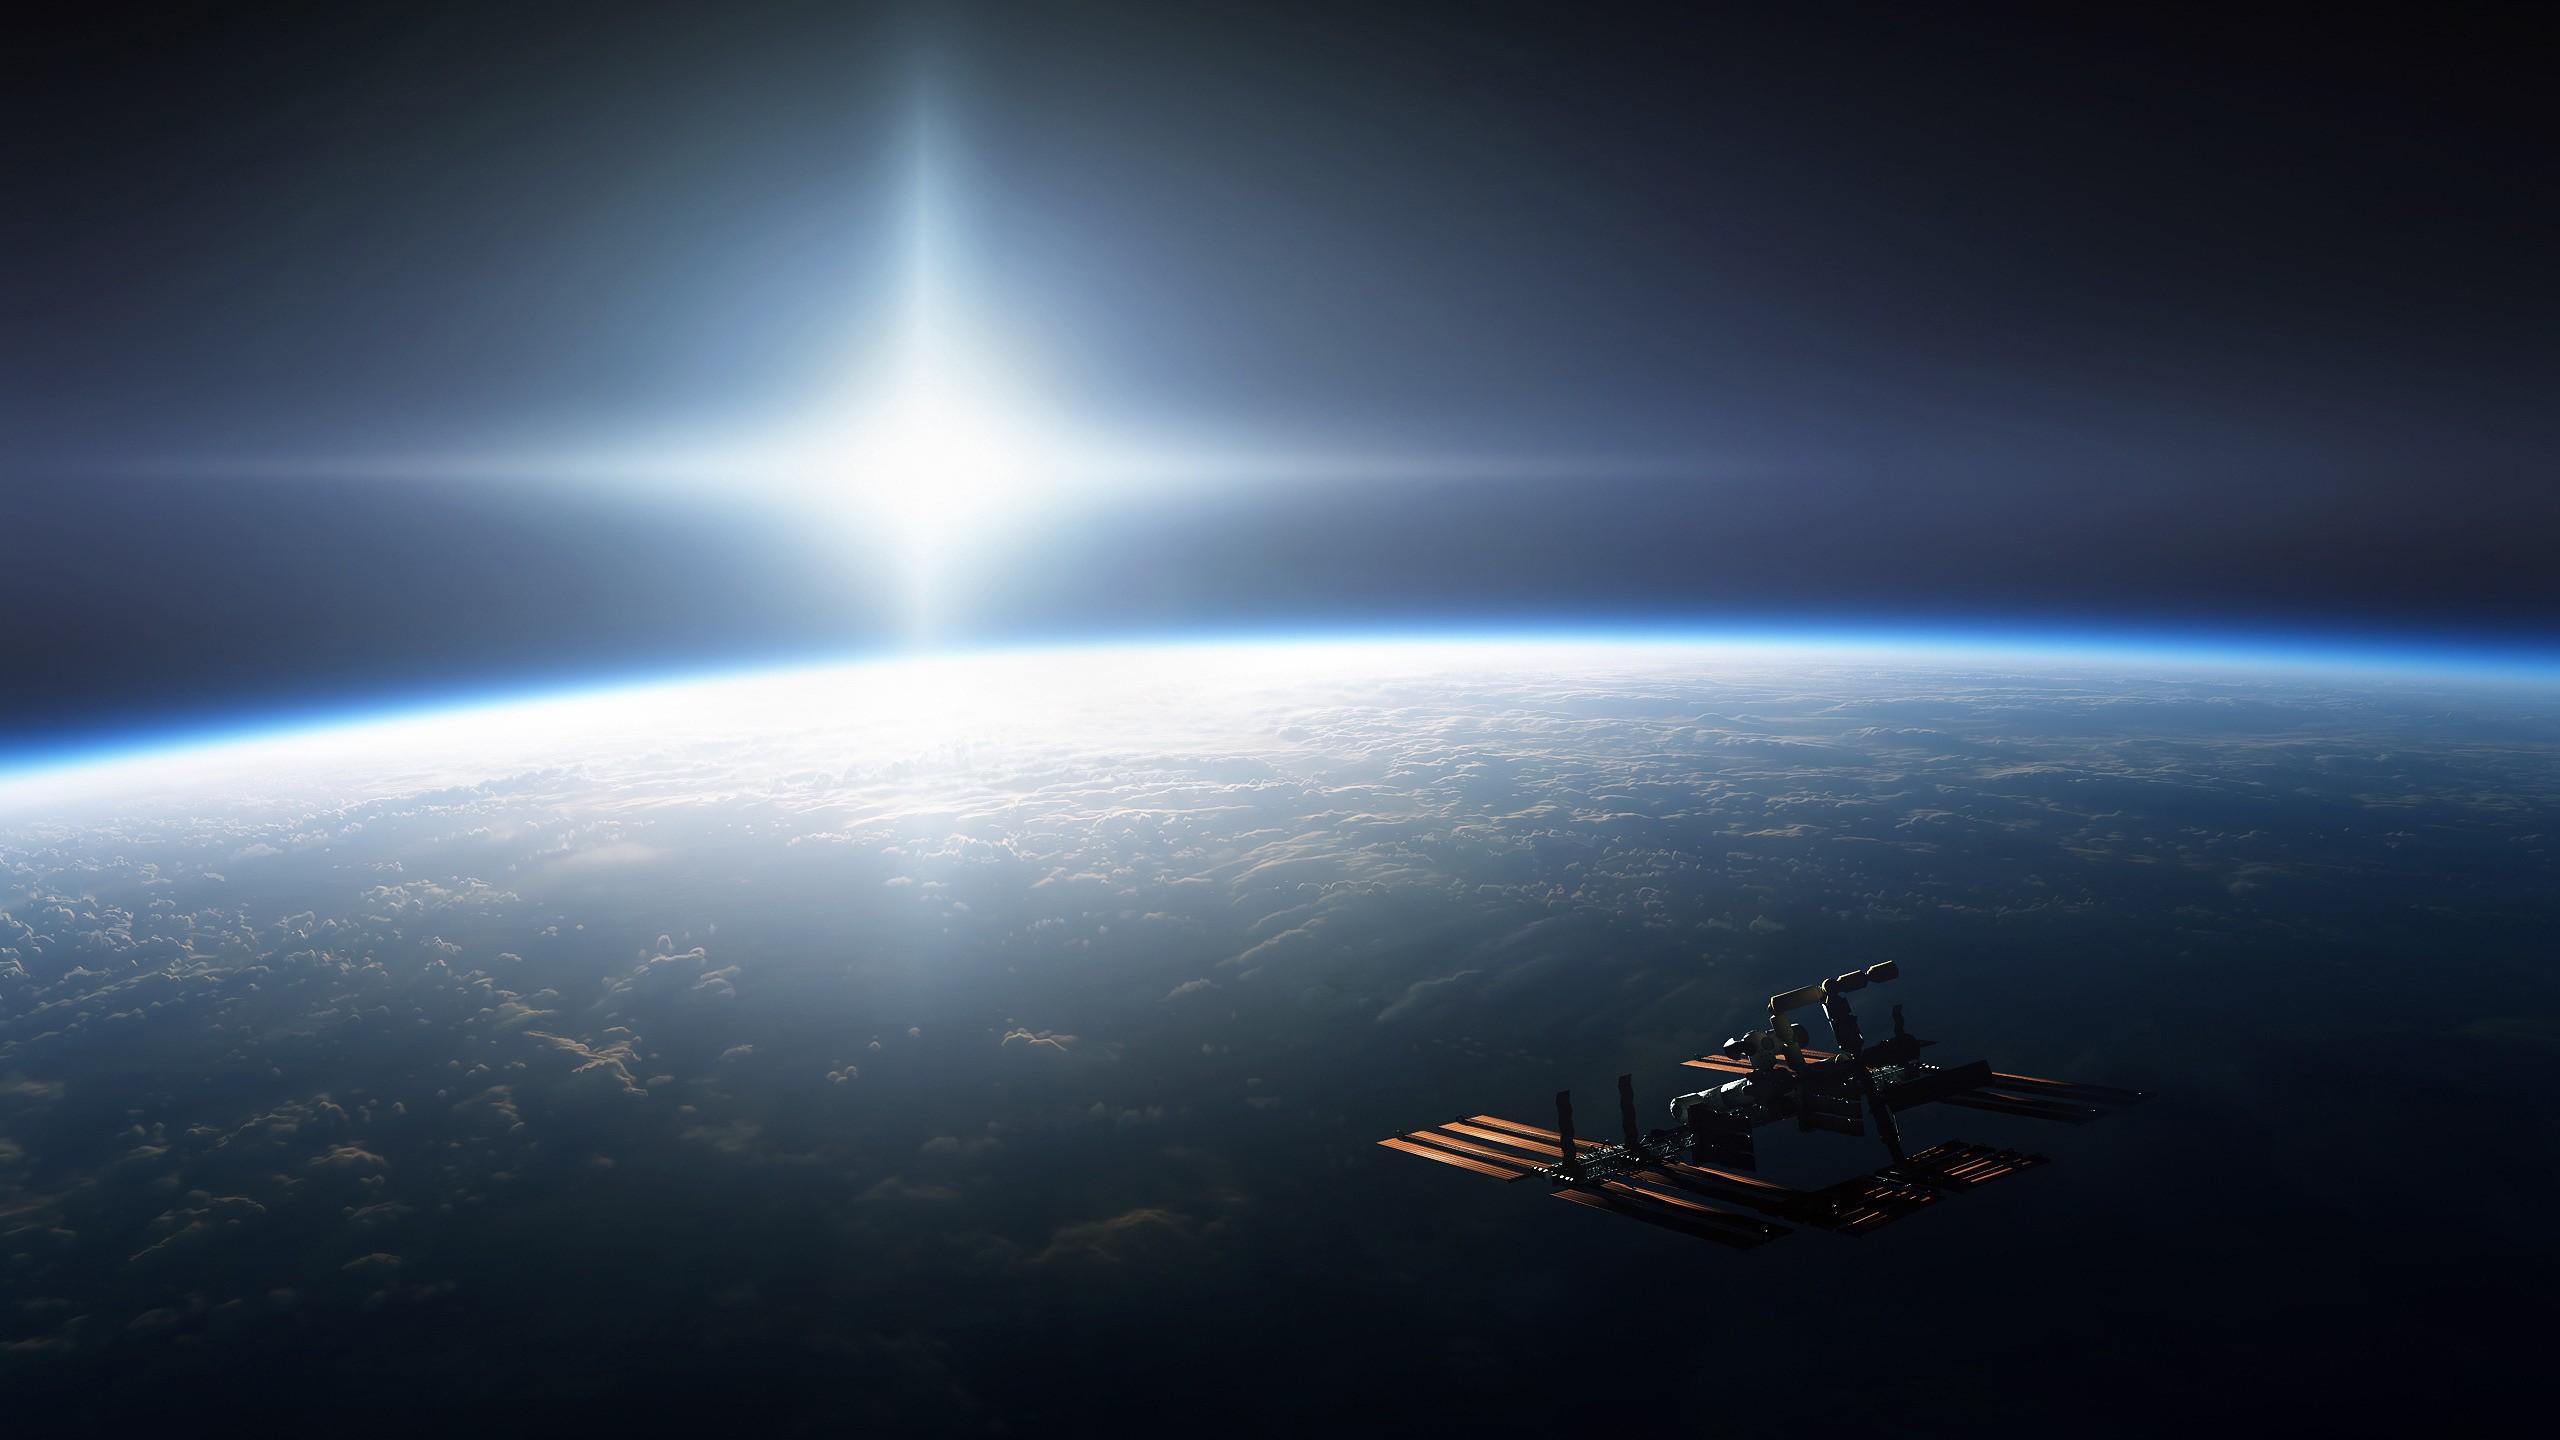 General 2560x1440 International Space Station space Earth space art planet